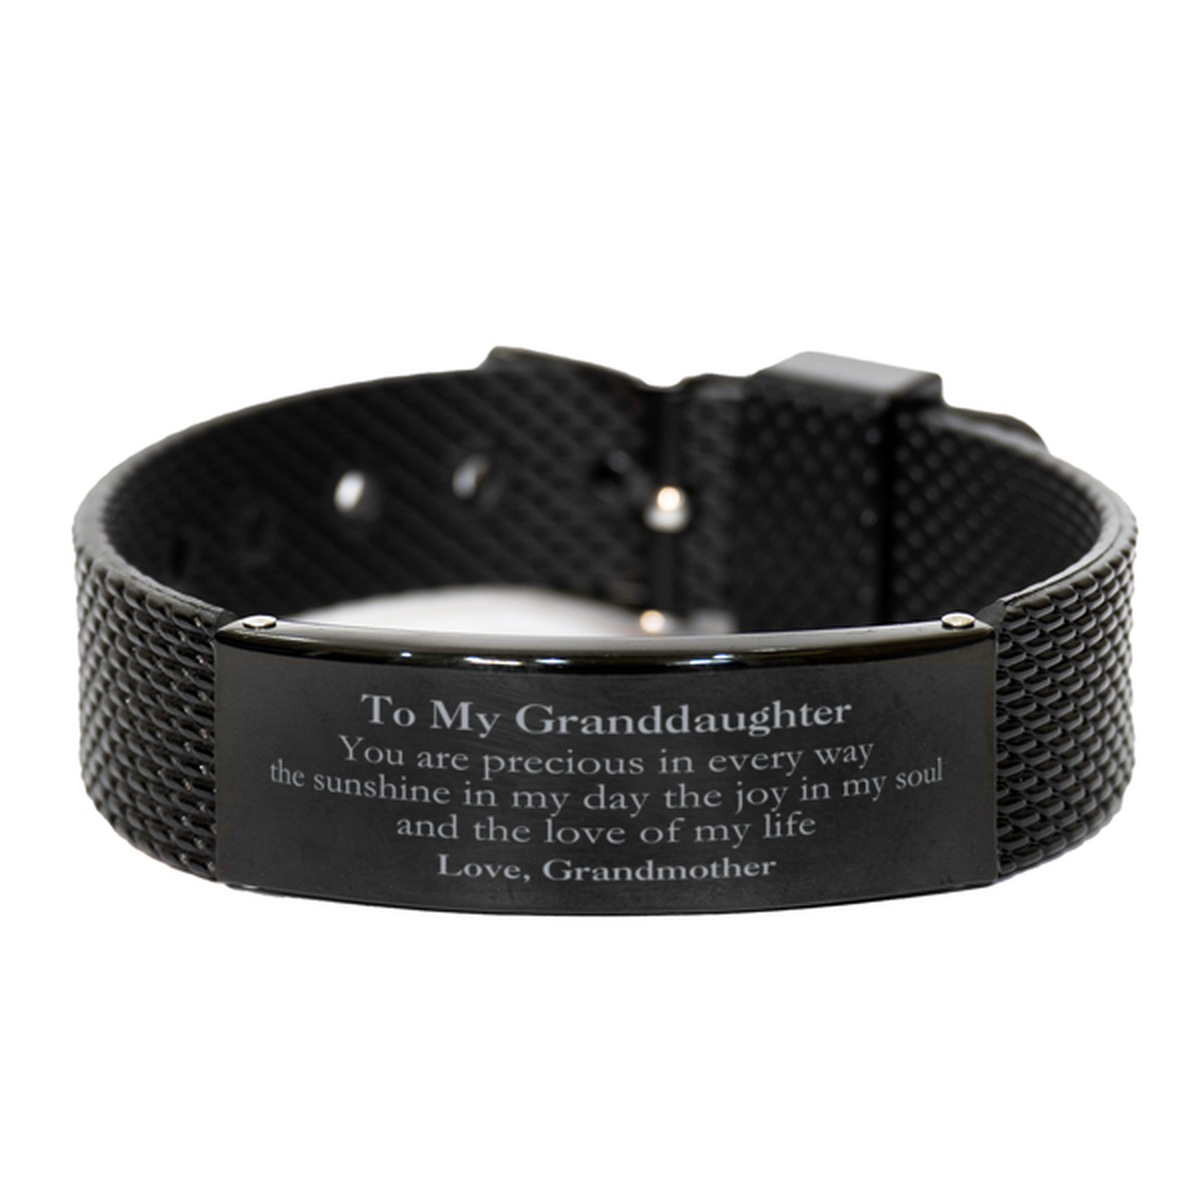 Graduation Gifts for Granddaughter Black Shark Mesh Bracelet Present from Grandmother, Christmas Granddaughter Birthday Gifts Granddaughter You are precious in every way the sunshine in my day. Love, Grandmother